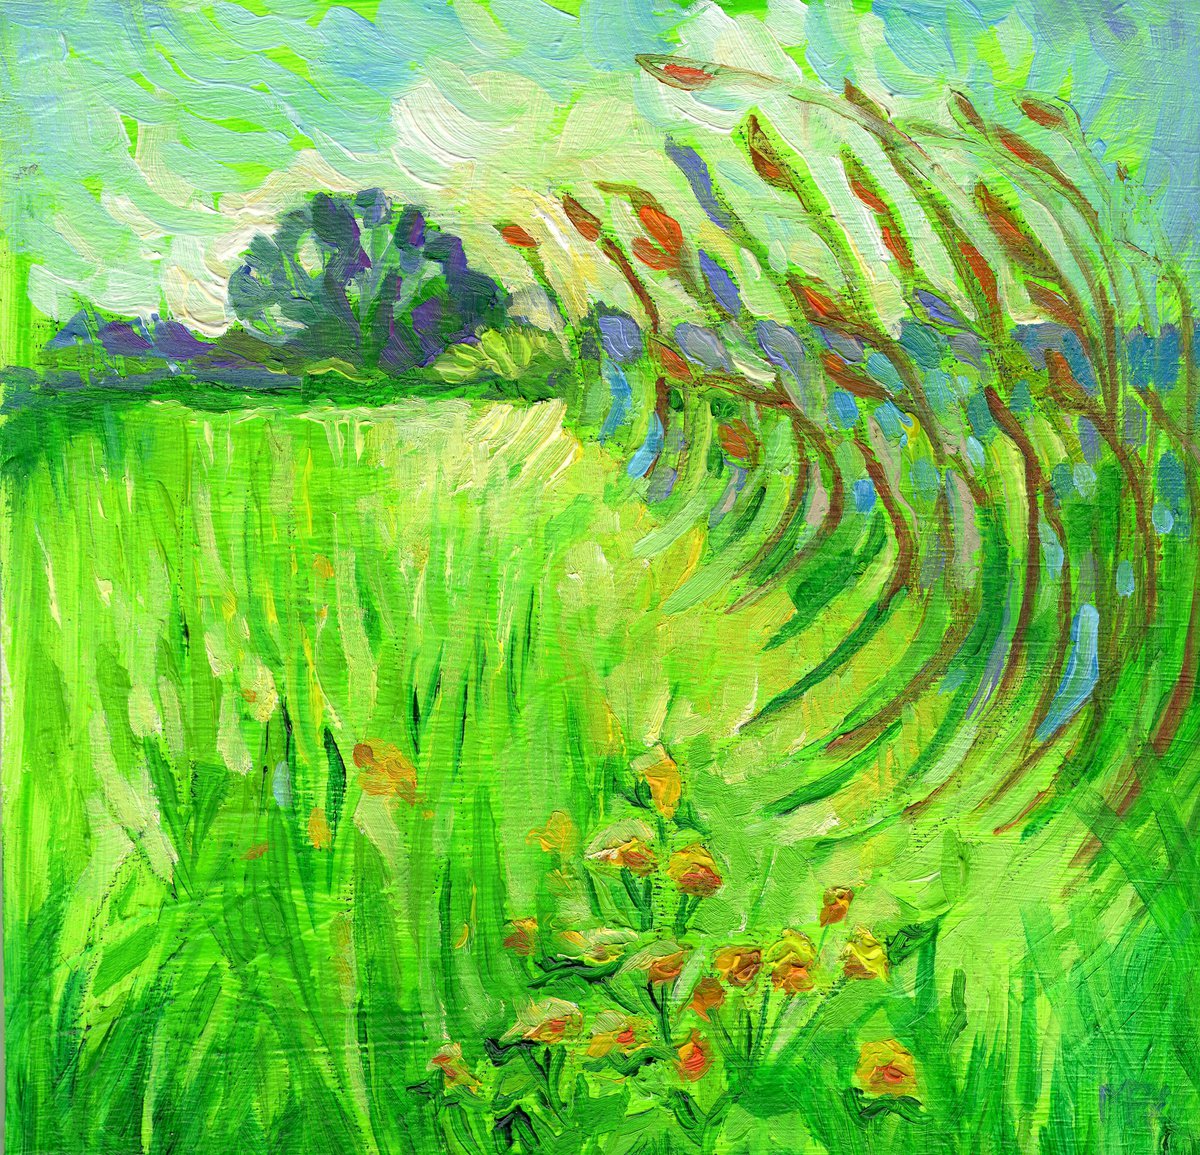 Reeds on the Norfolk Marshes - Small Landscape by Mary Kemp